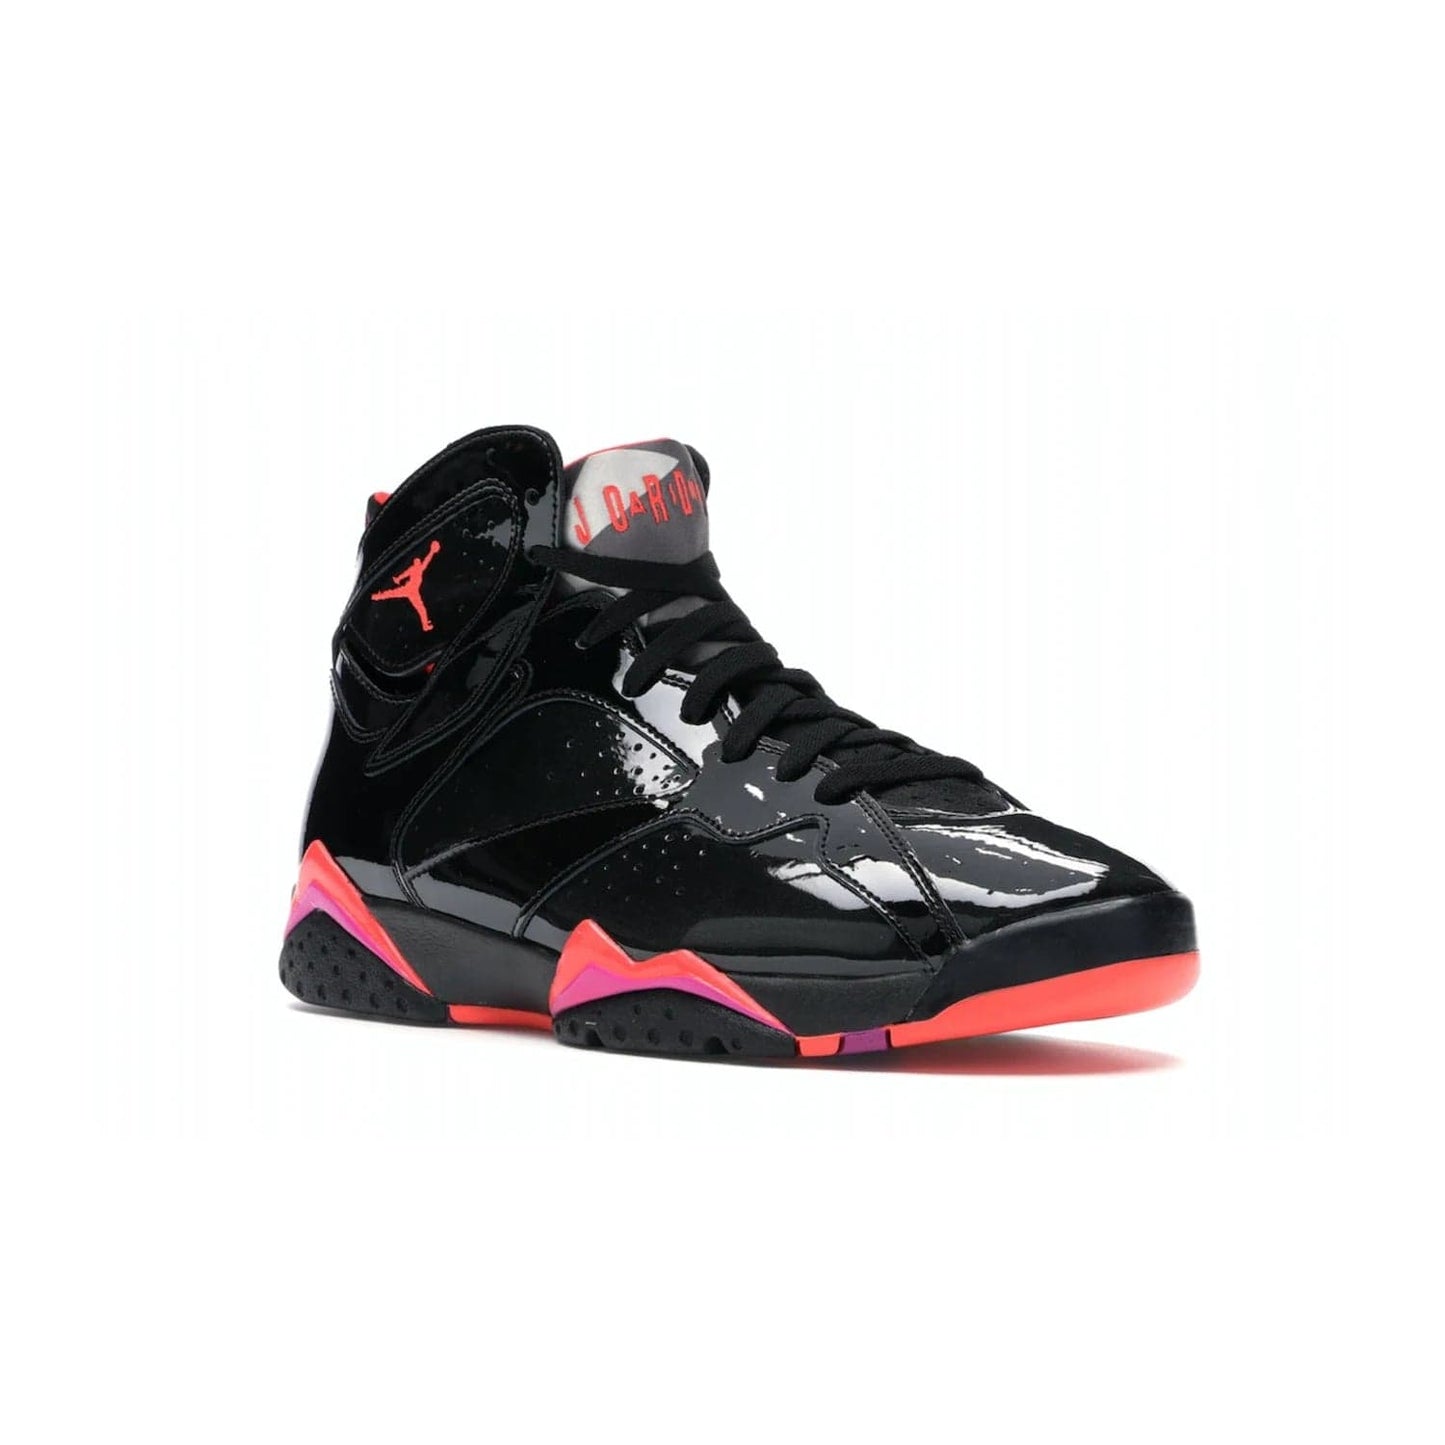 Jordan 7 Retro Black Patent (Women's) - Image 5 - Only at www.BallersClubKickz.com - #
Classic colorway! Shop the new Jordan 7 Retro Black Patent. Featuring a sleek combination of leather and patent leather upper, these shoes offer a bold yet luxurious look. Perfectly complete with a bright red Jumpman logo. Self-lacing Smart laces and Air-Sole cushion unit provide comfort and convenience.